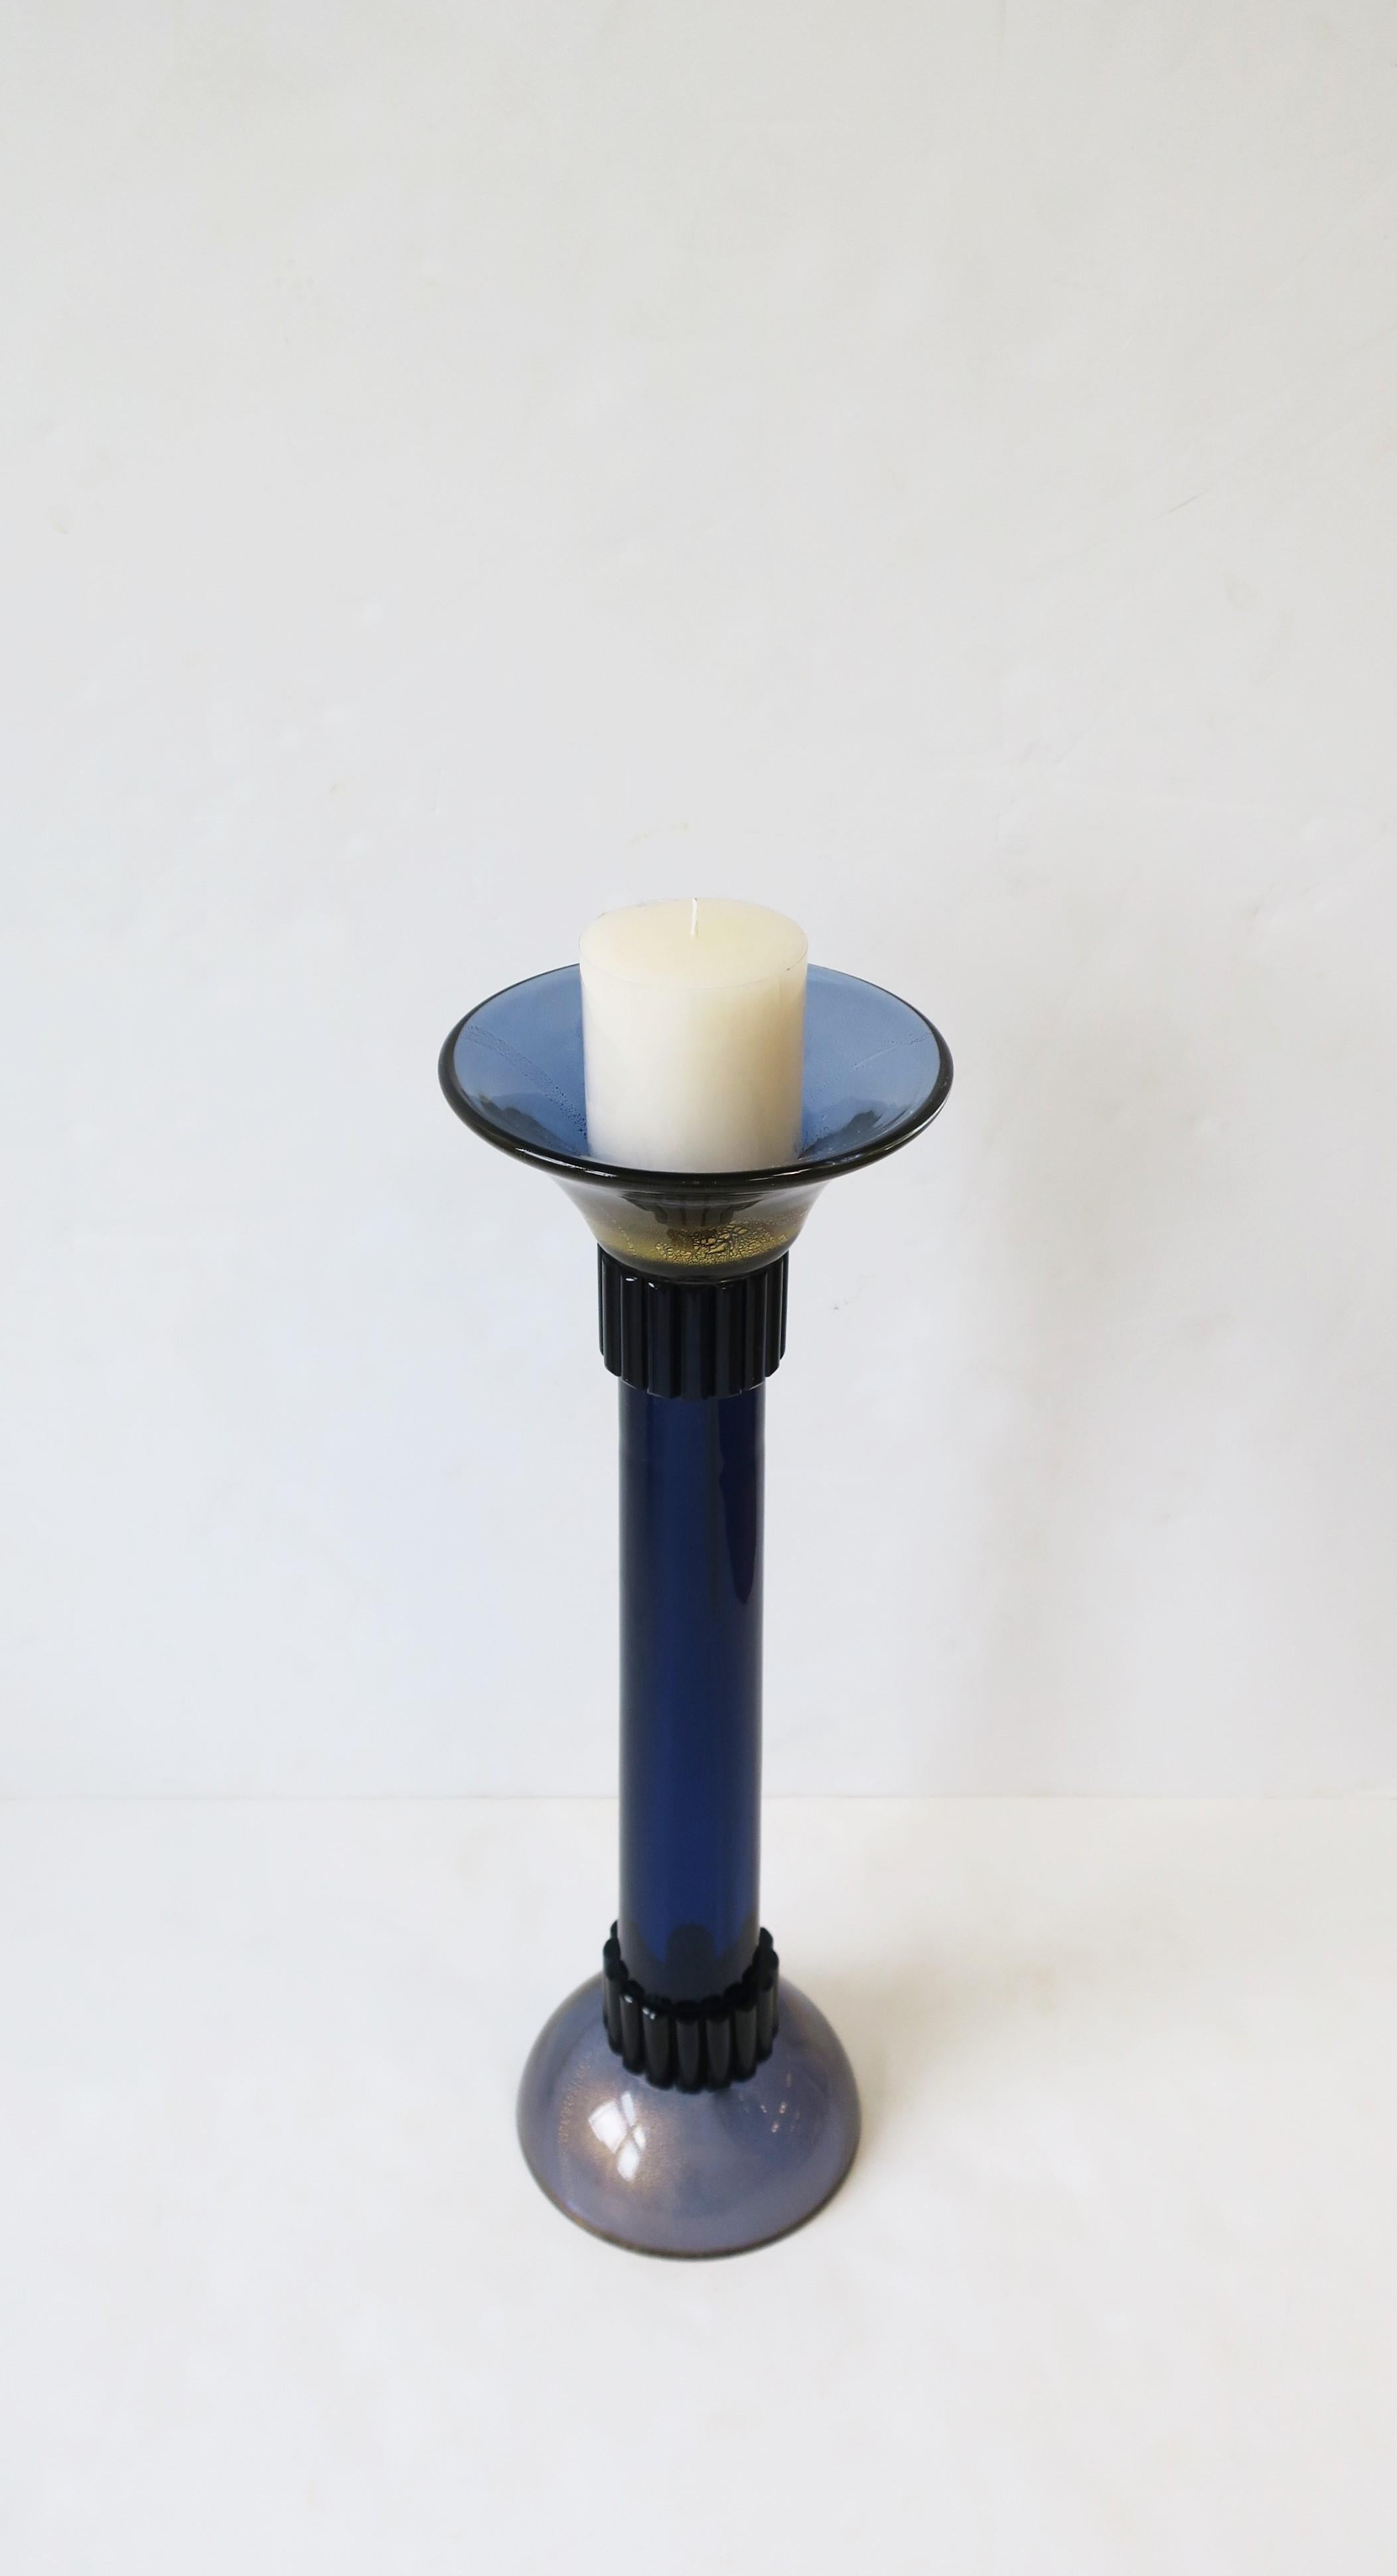 Art Glass Modern Italian Murano Blue Torchiere Candlestick Holder Table or Floor, Large For Sale